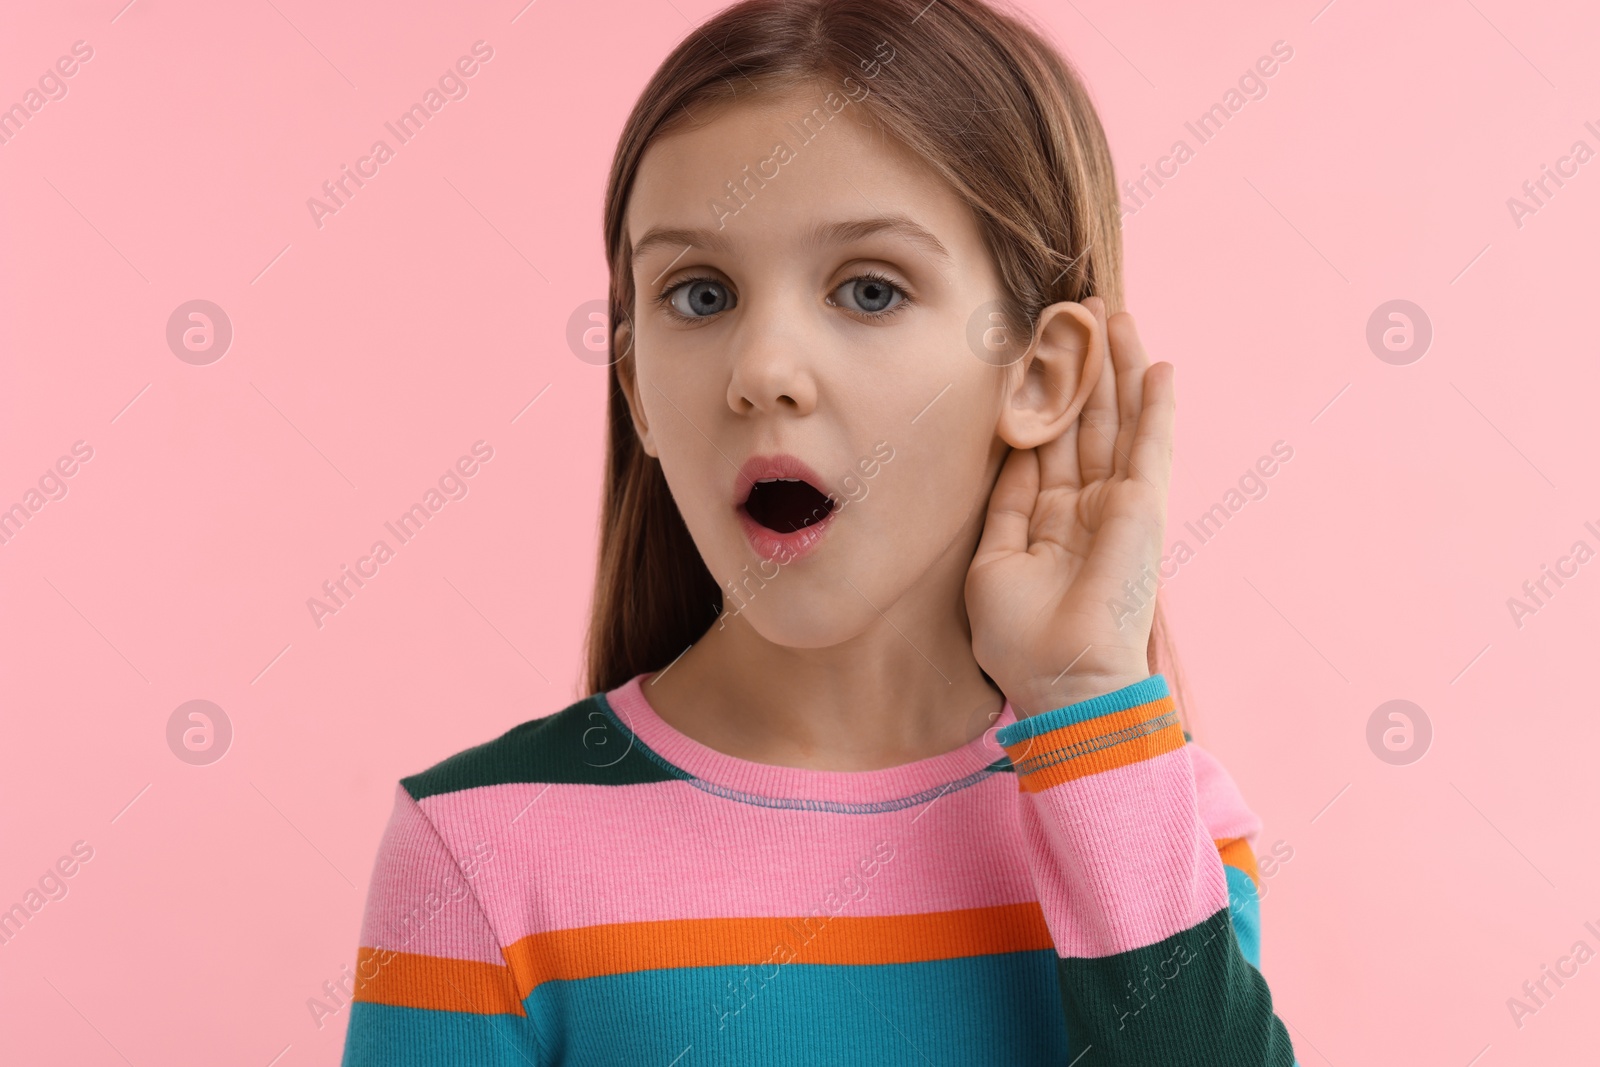 Photo of Little girl with hearing problem on pink background